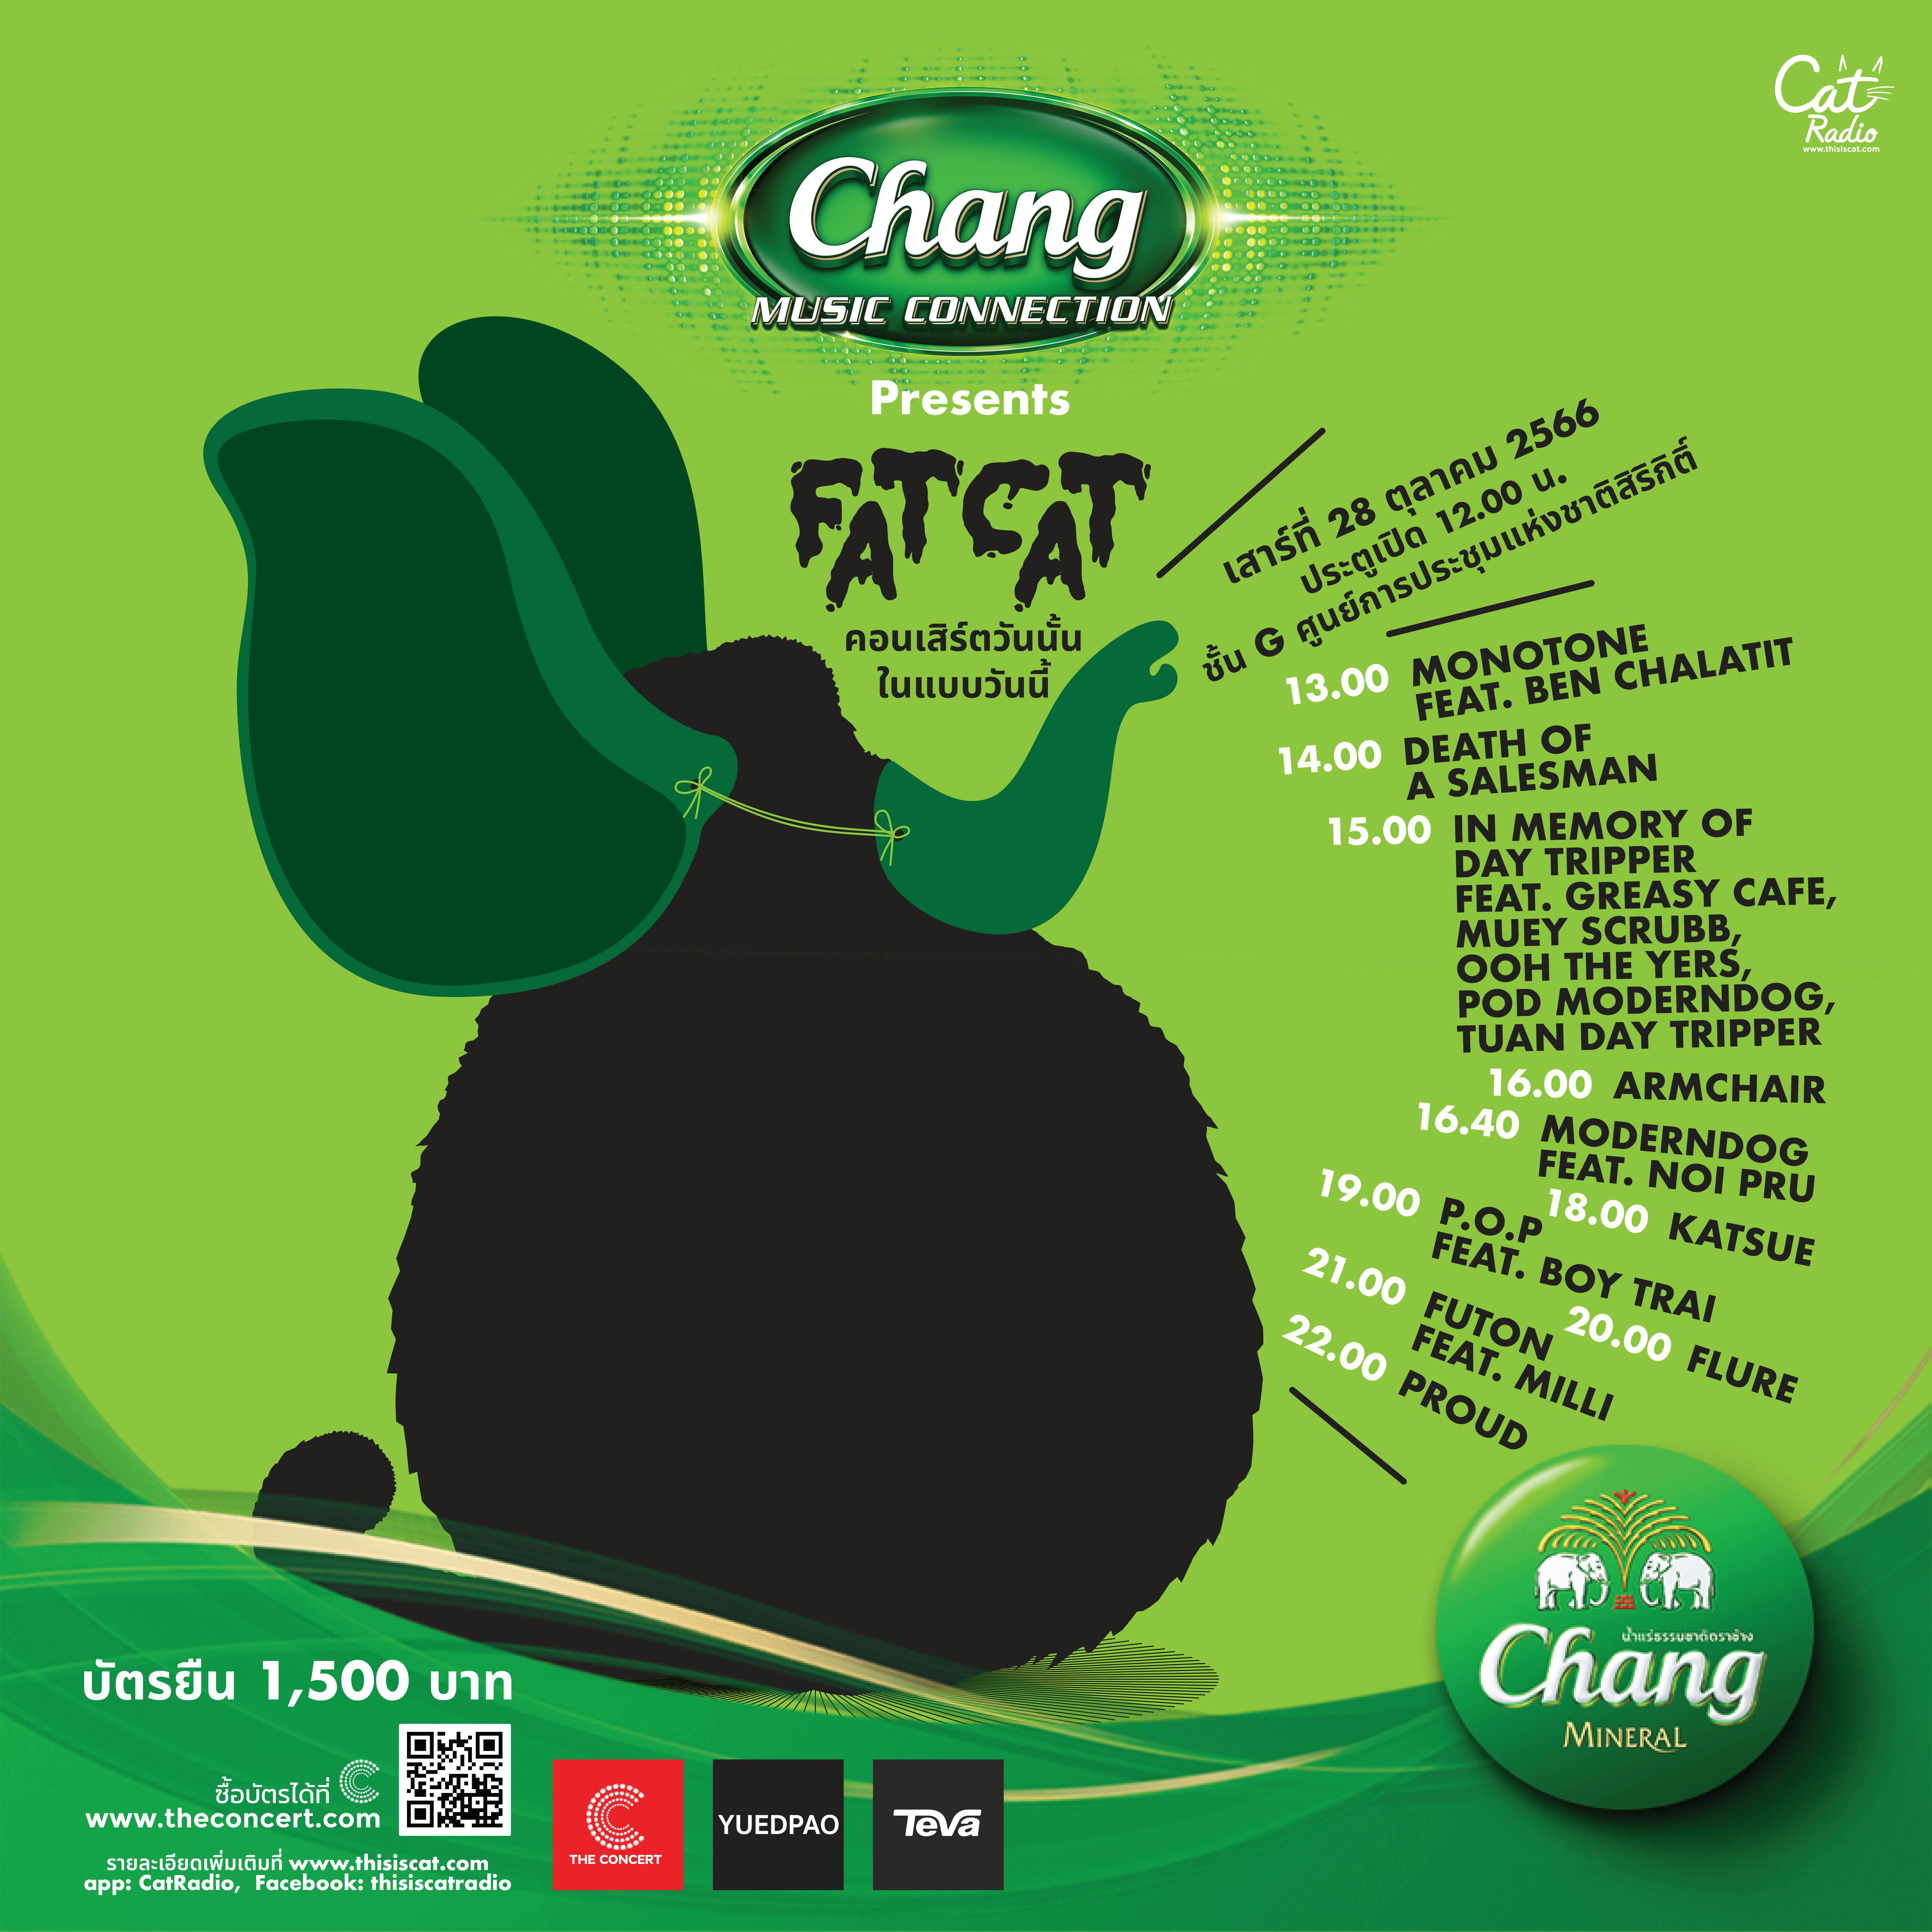 CHANG MUSIC CONNECTION PRESENTS FATCAT